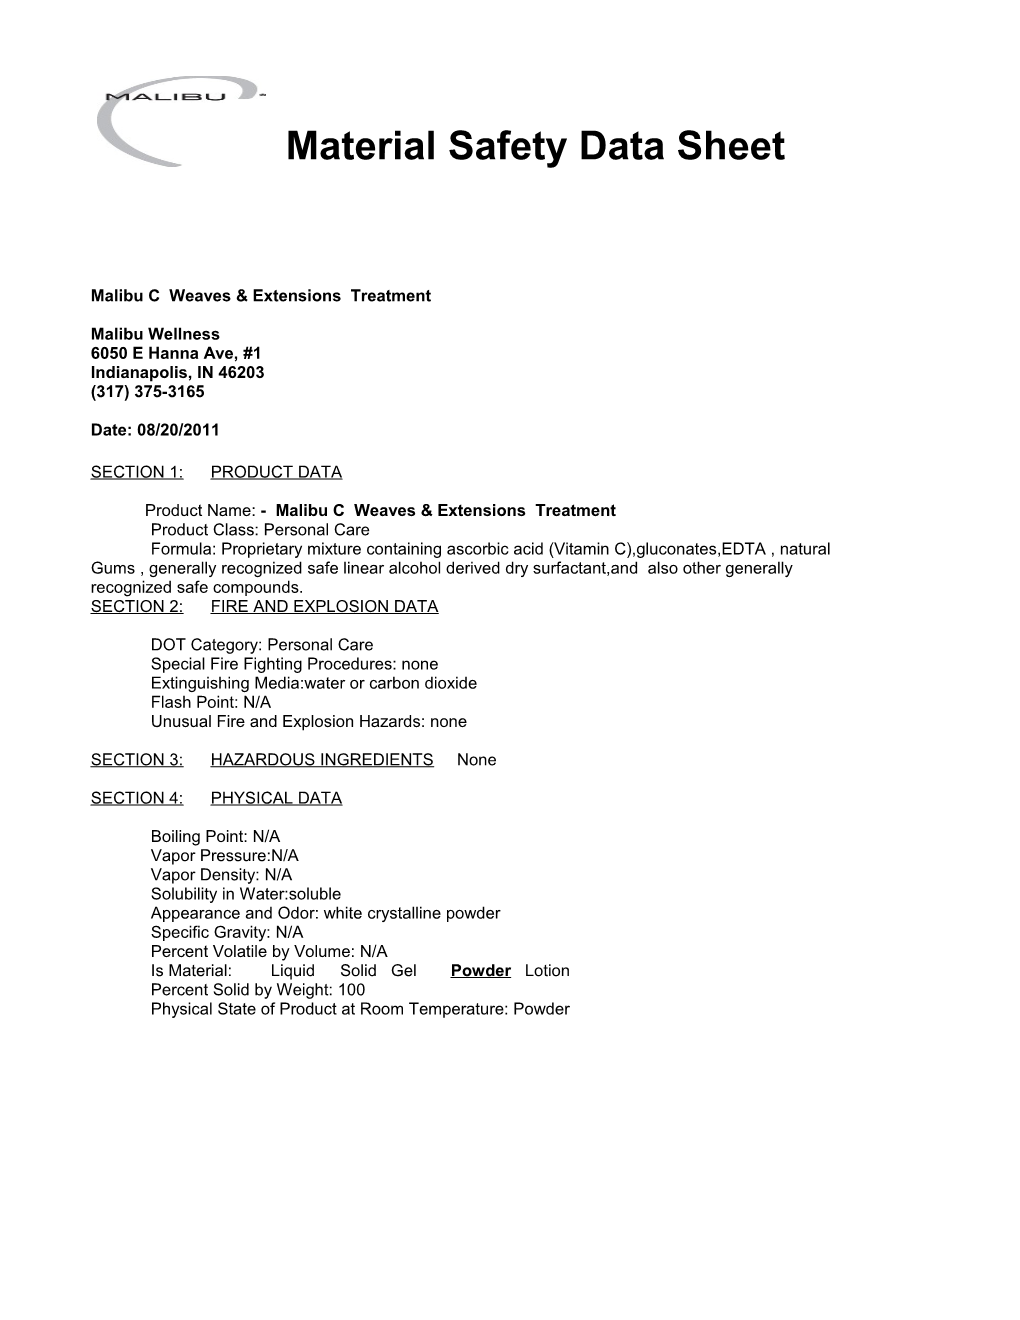 Material Safety Data Sheet s46